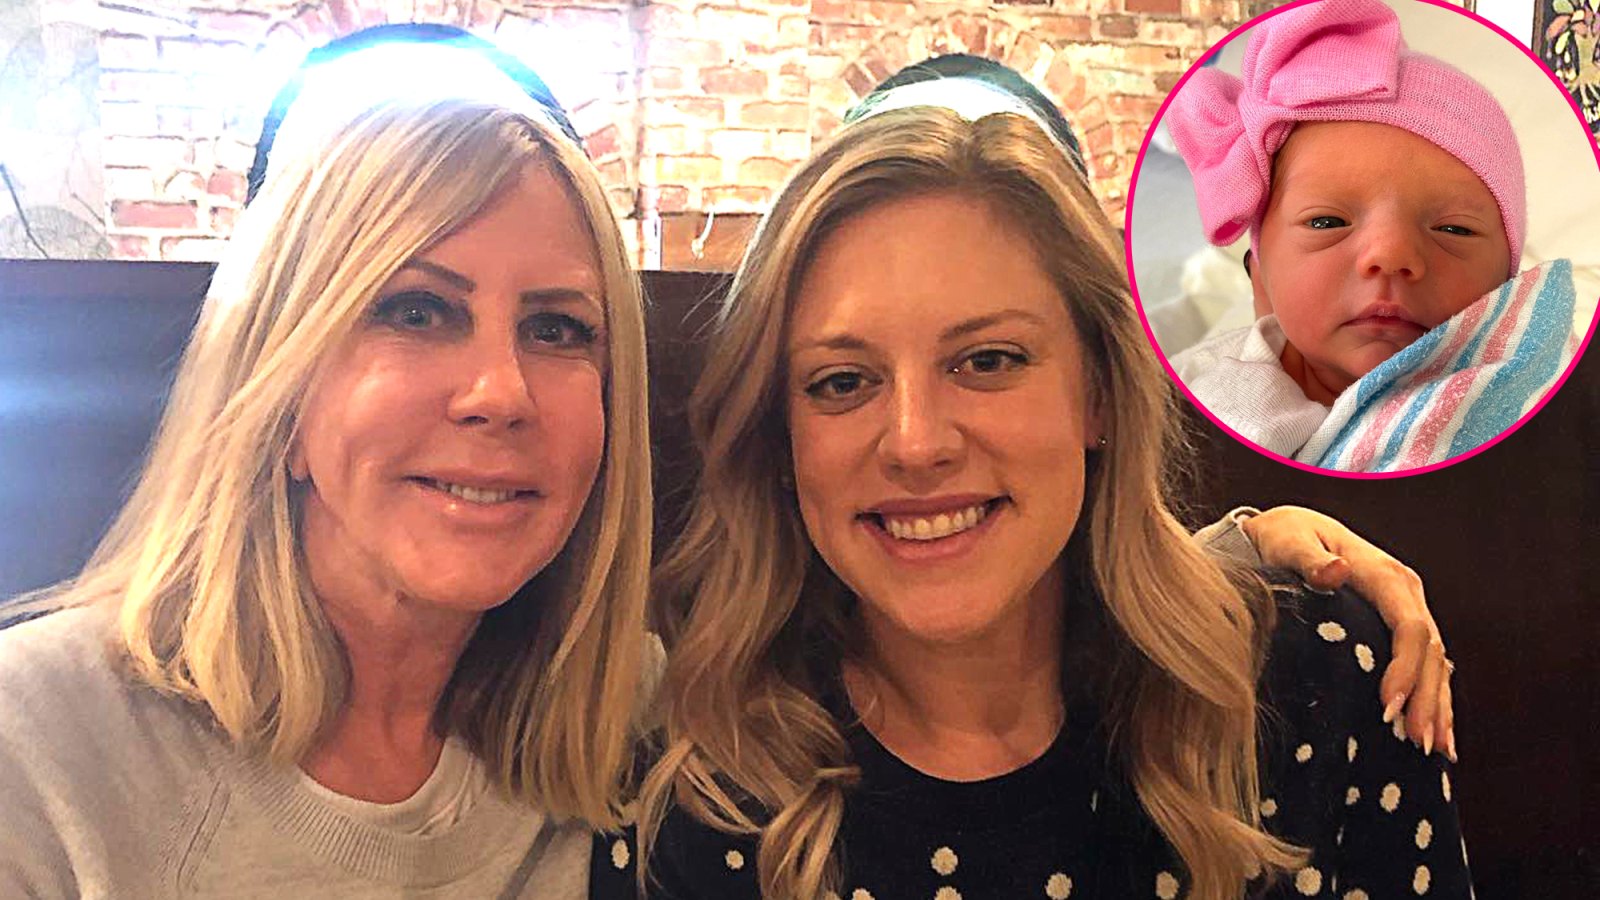 Vicki Gunvalson’s Daughter Briana Culberson Gives Birth, Welcomes 4th Baby With Husband Ryan Culberson